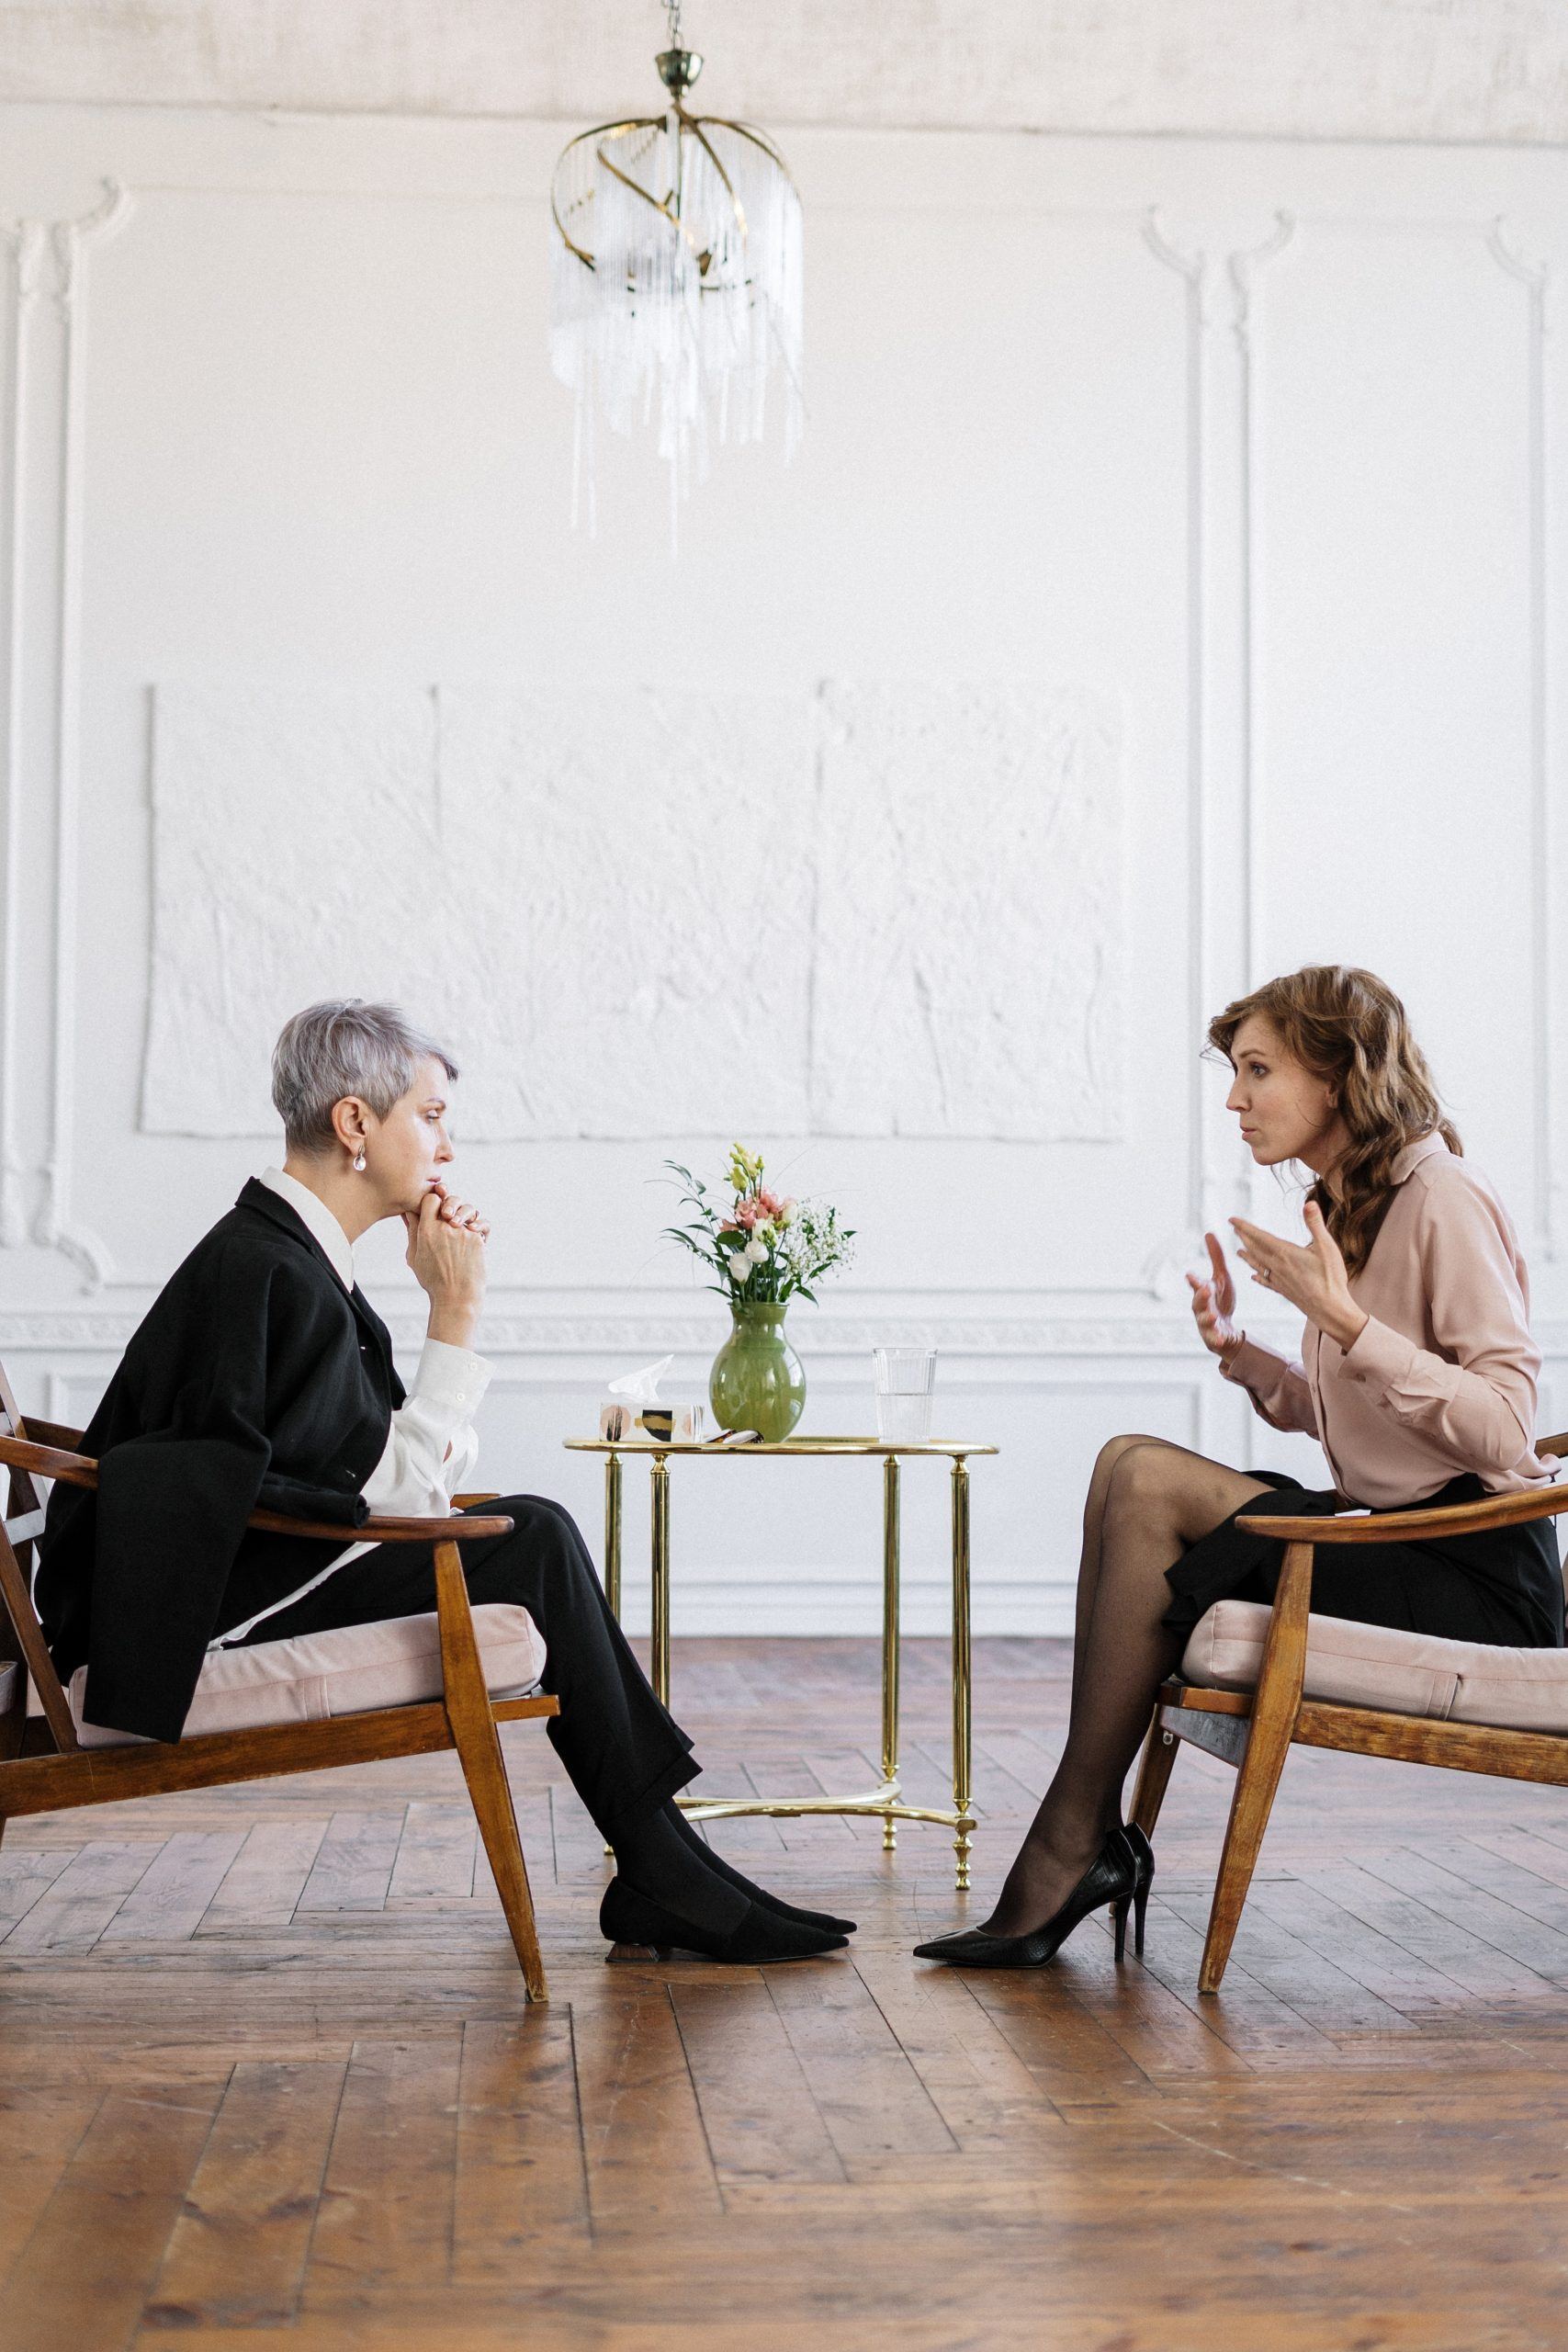 How Can Therapists Improve Mental Health Care for Seniors?